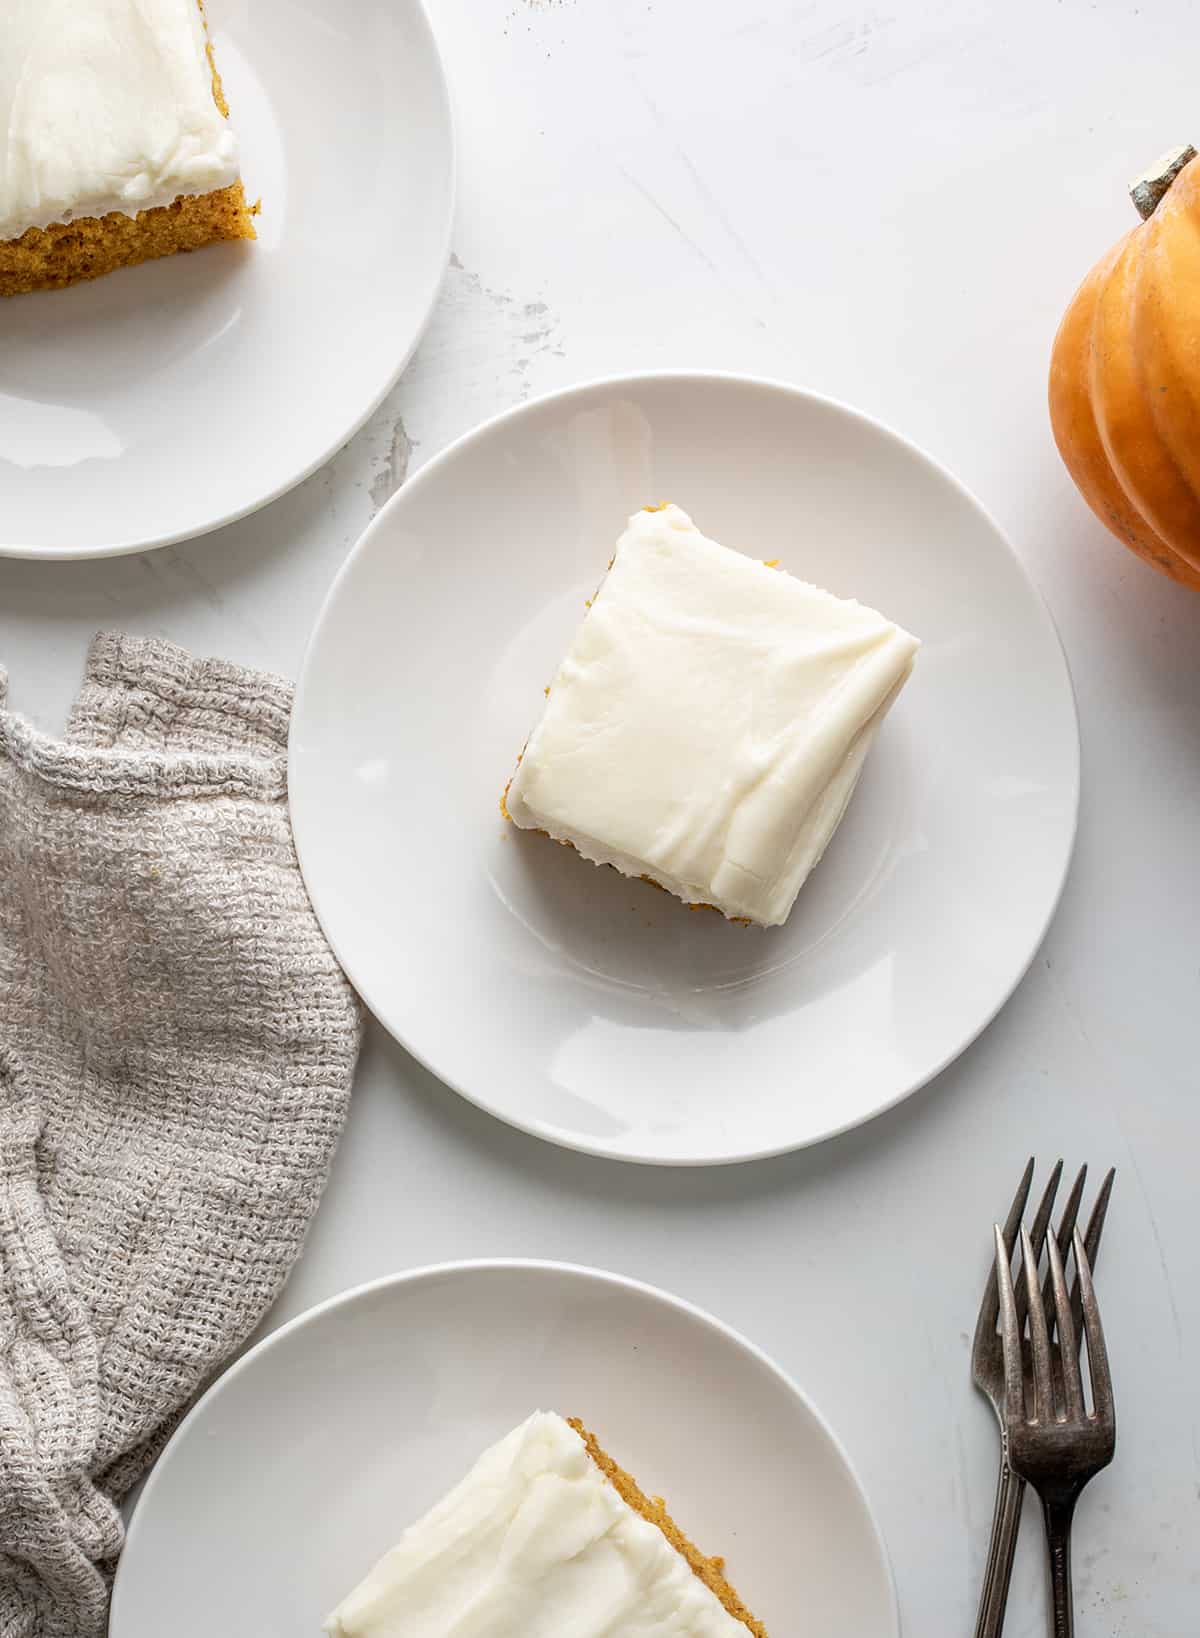 Plates of Pumpkin Bars with Cream Cheese Frosting on a White Table.